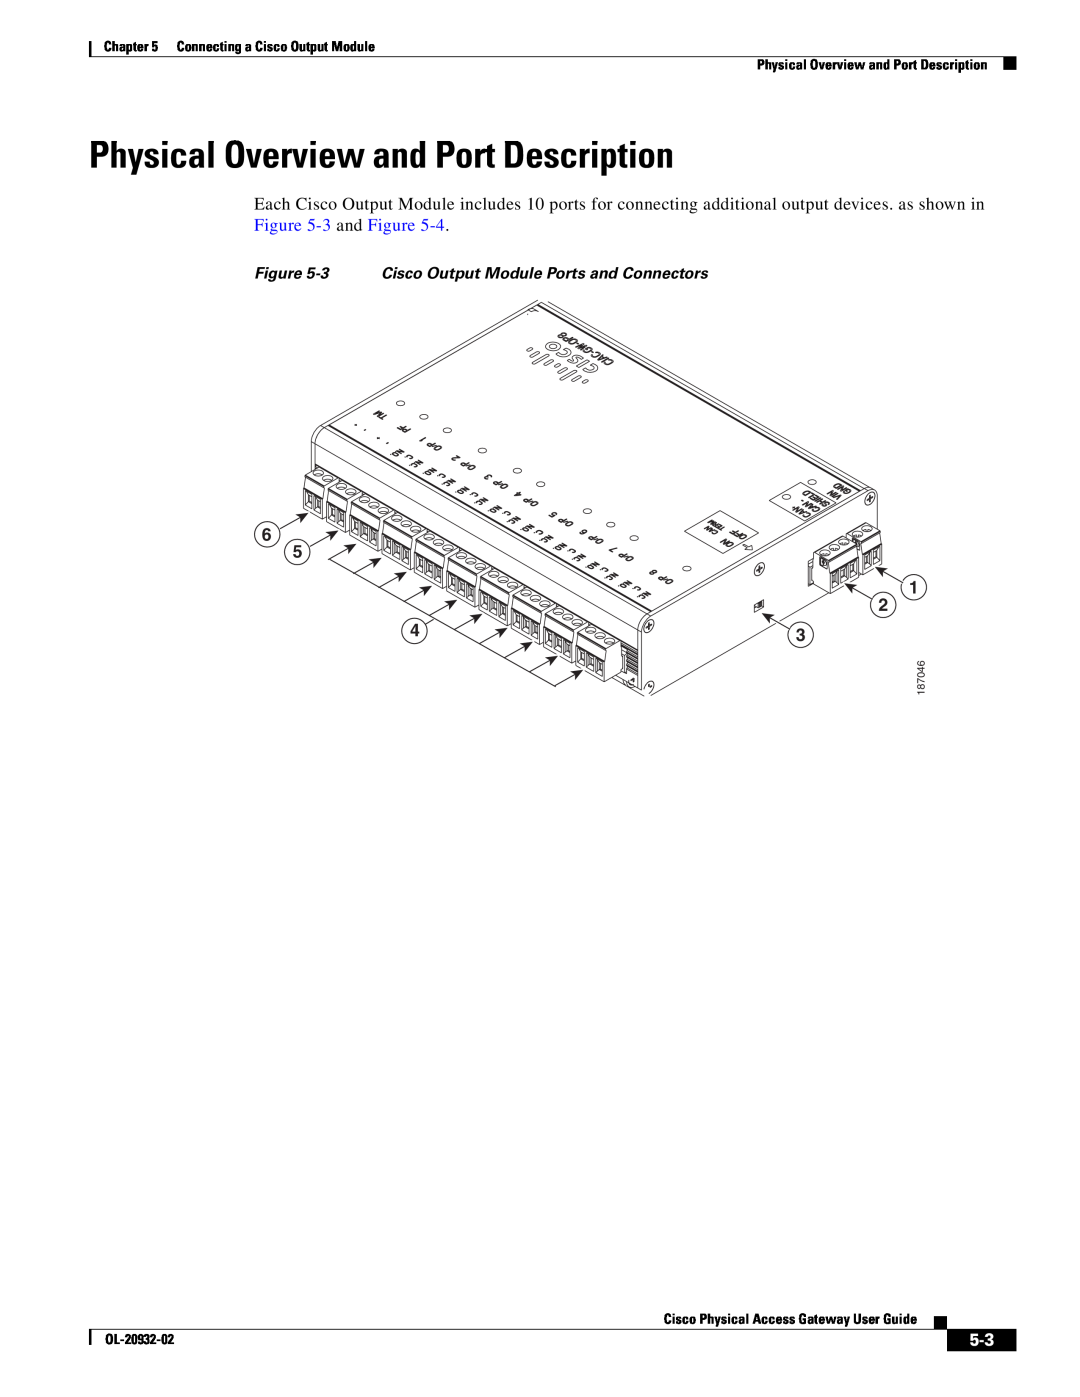 Cisco Systems OL-20932-02 manual Physical Overview and Port Description, 3 Cisco Output Module Ports and Connectors, 187046 